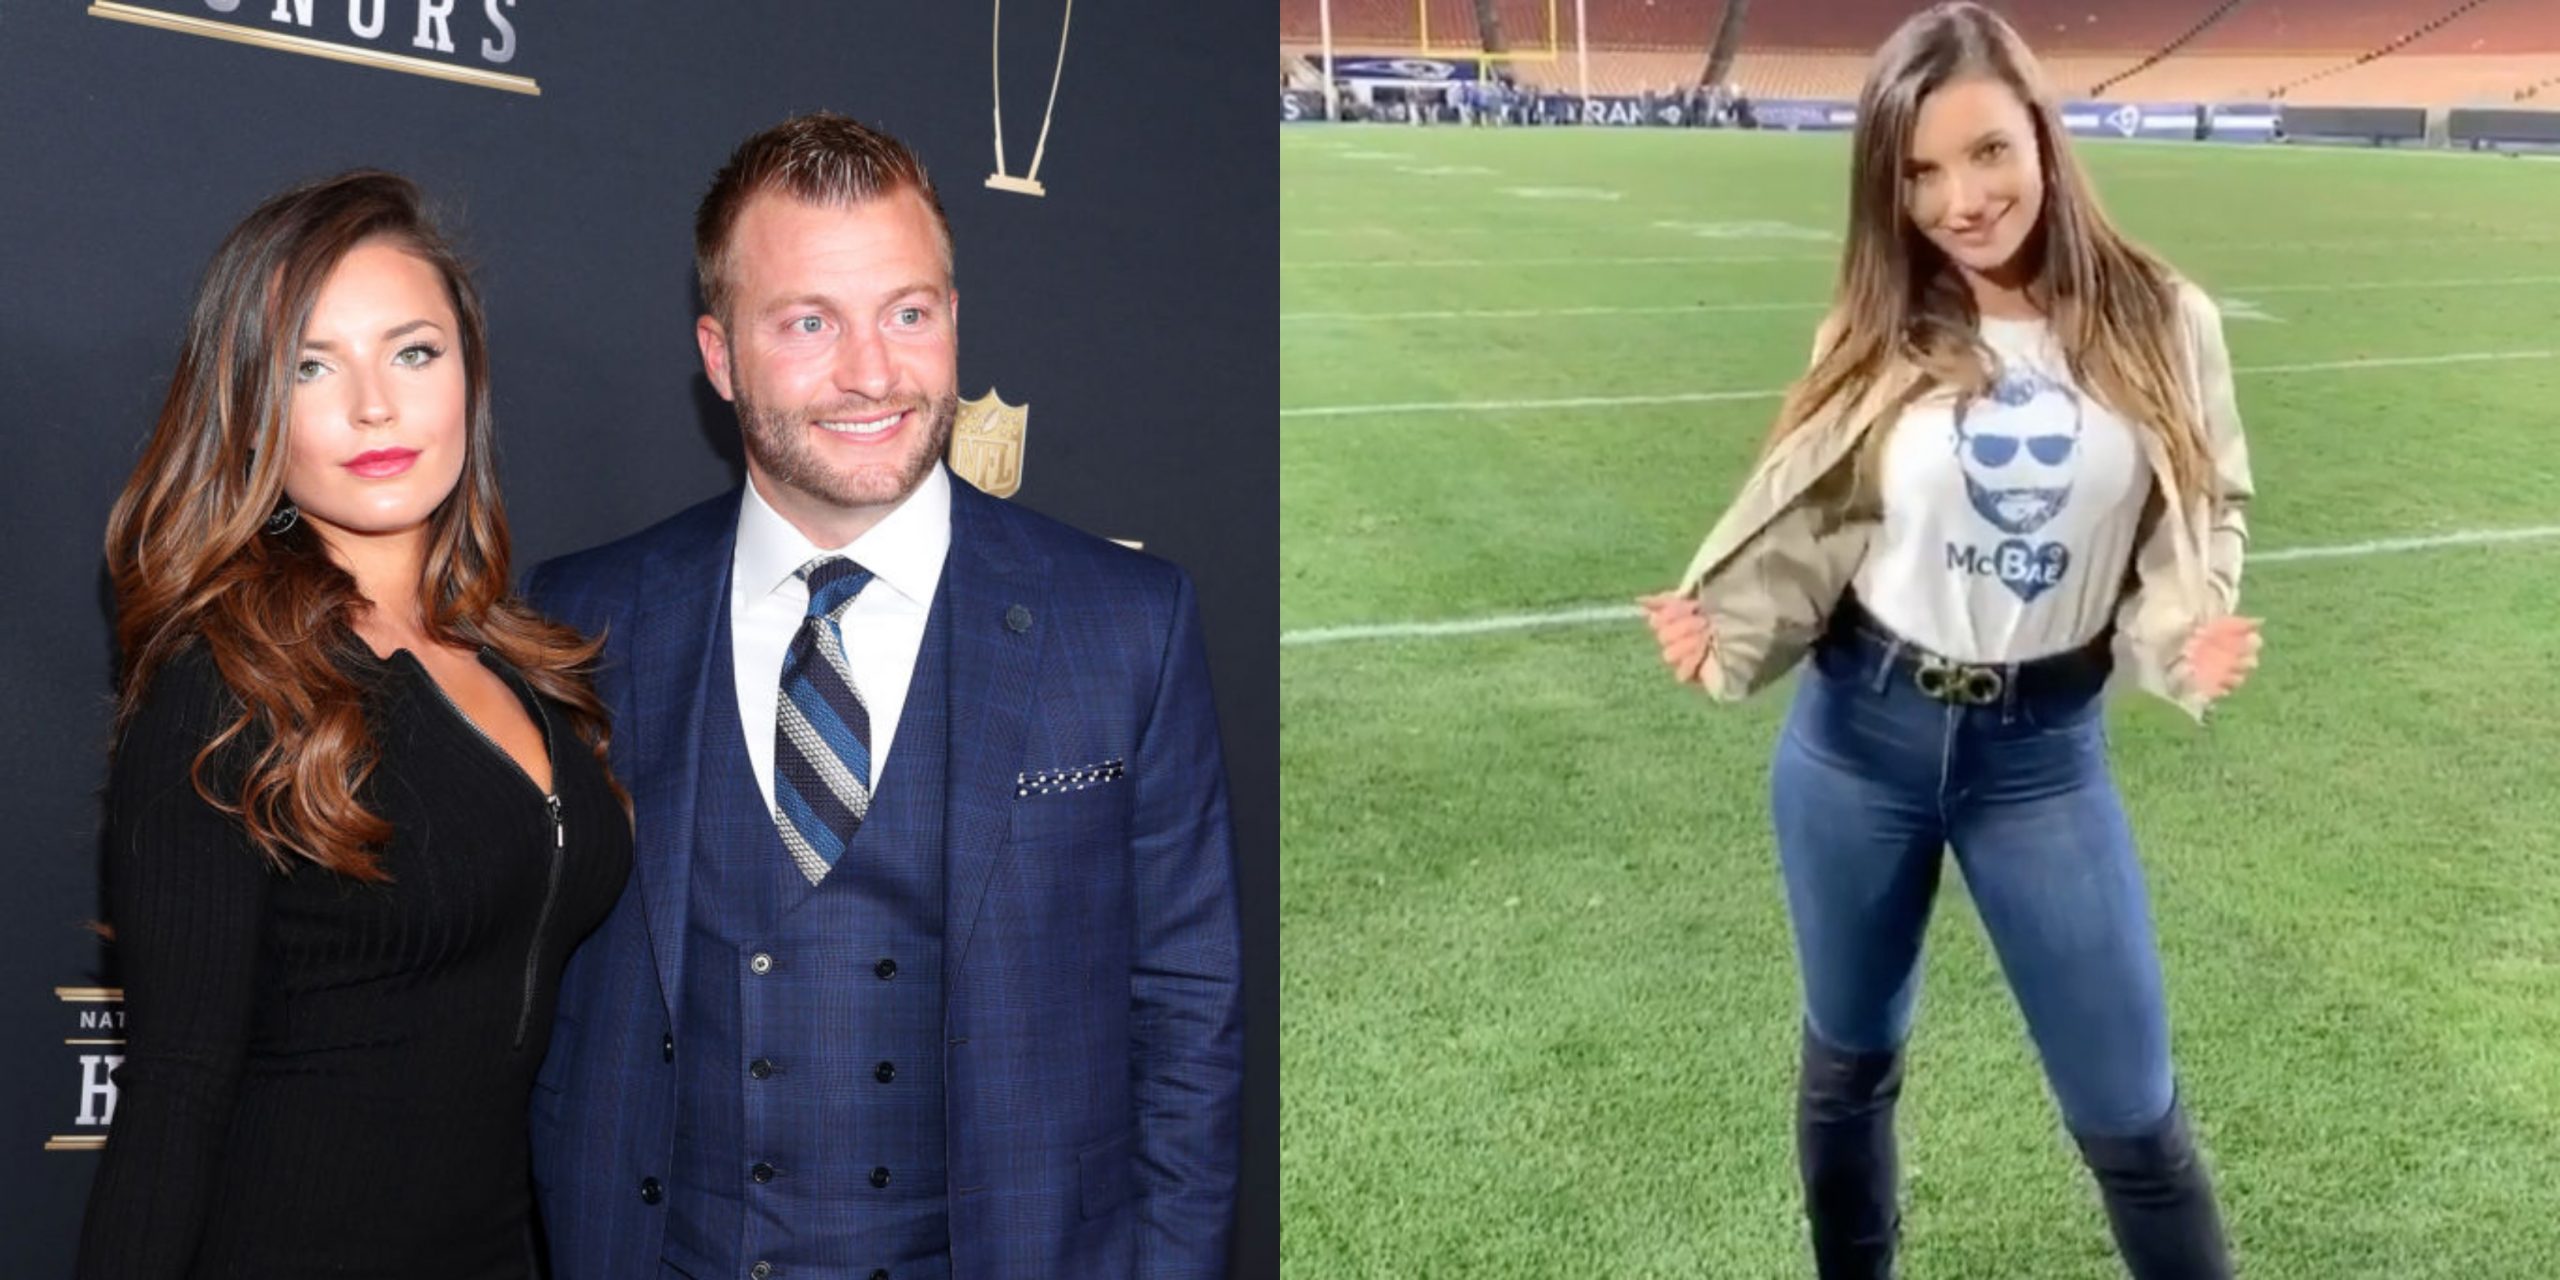 Sean mcvay's wife pictures